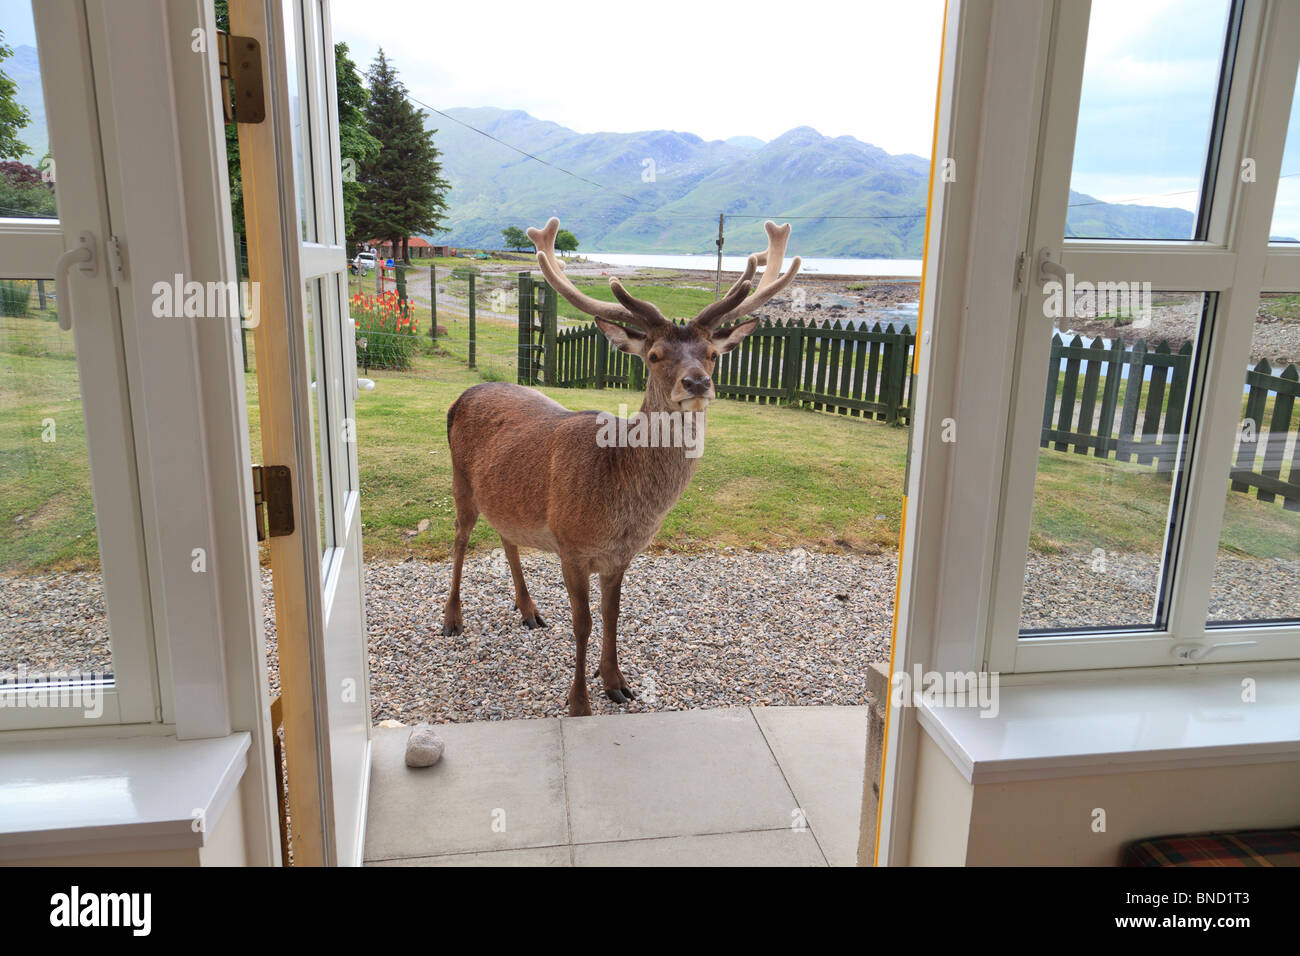 Wild Red deer stag stood at cottage door in Scotland hoping for bread or carrots! Stock Photo